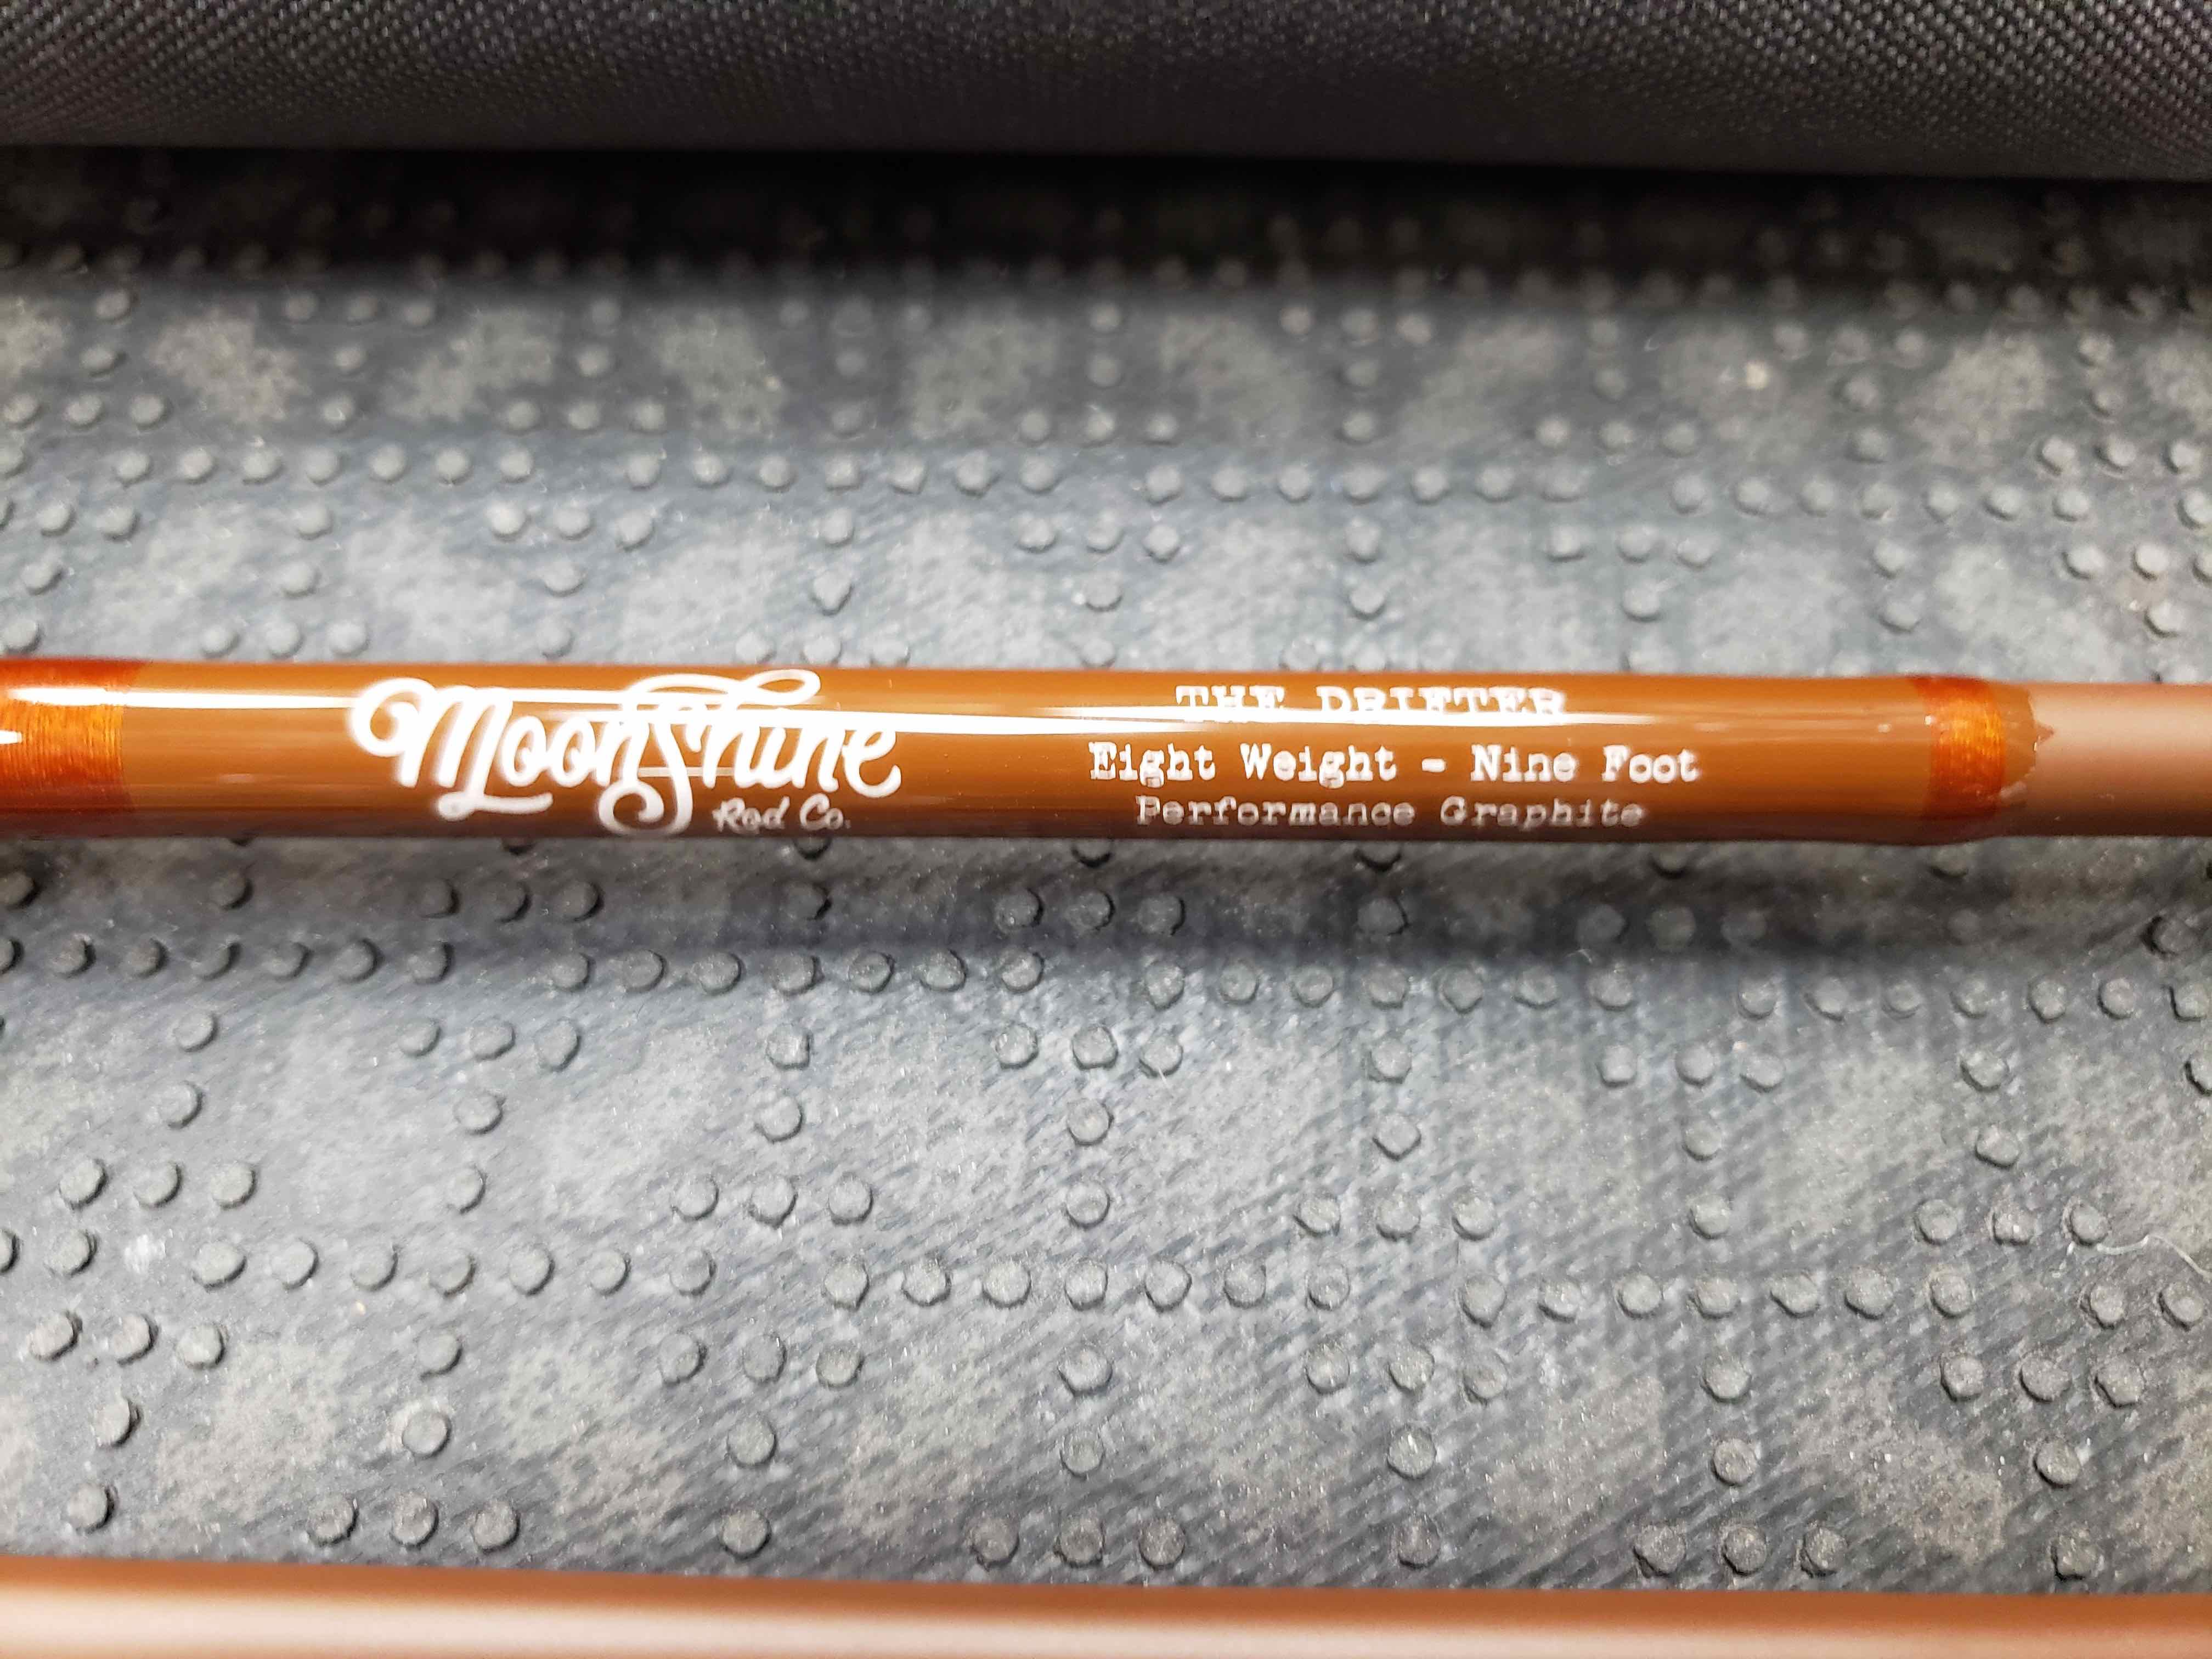 Moonshine Fly Rod Company - The Drifter - 8 Wt - 9’ - 4Pc - Four Fly Rod c/w Spare Tip - NEW! - $150